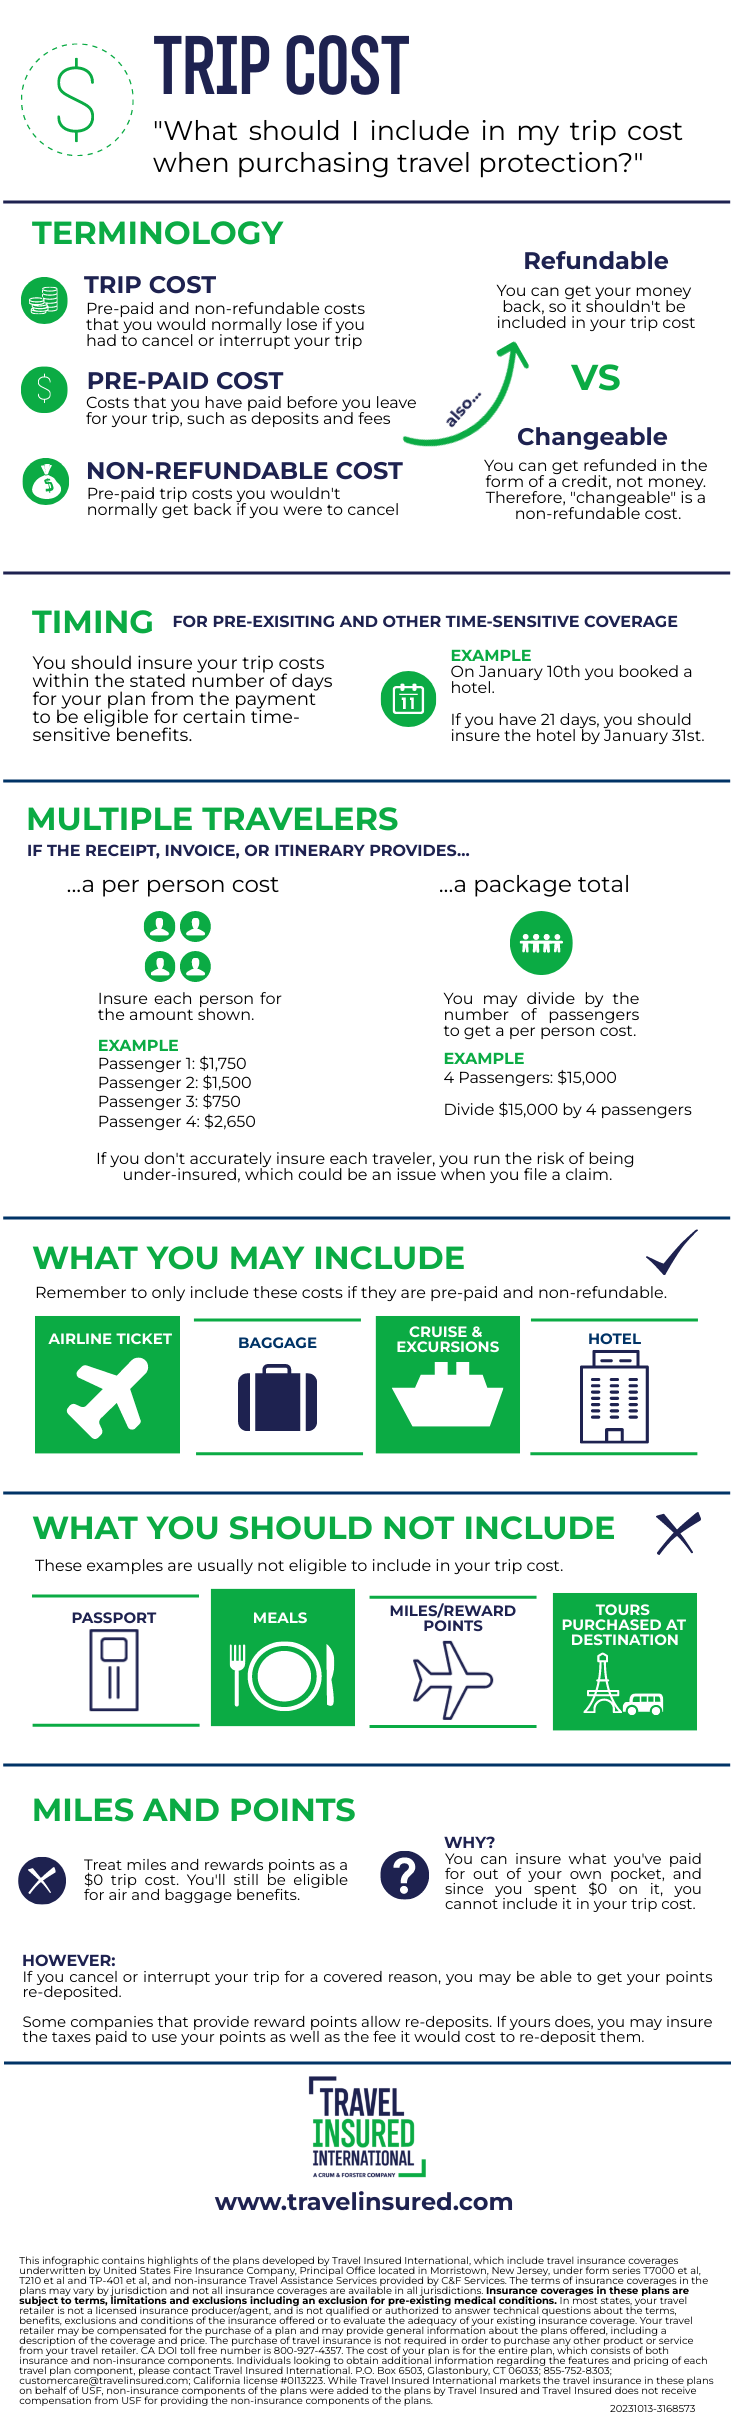 trip cost infographic